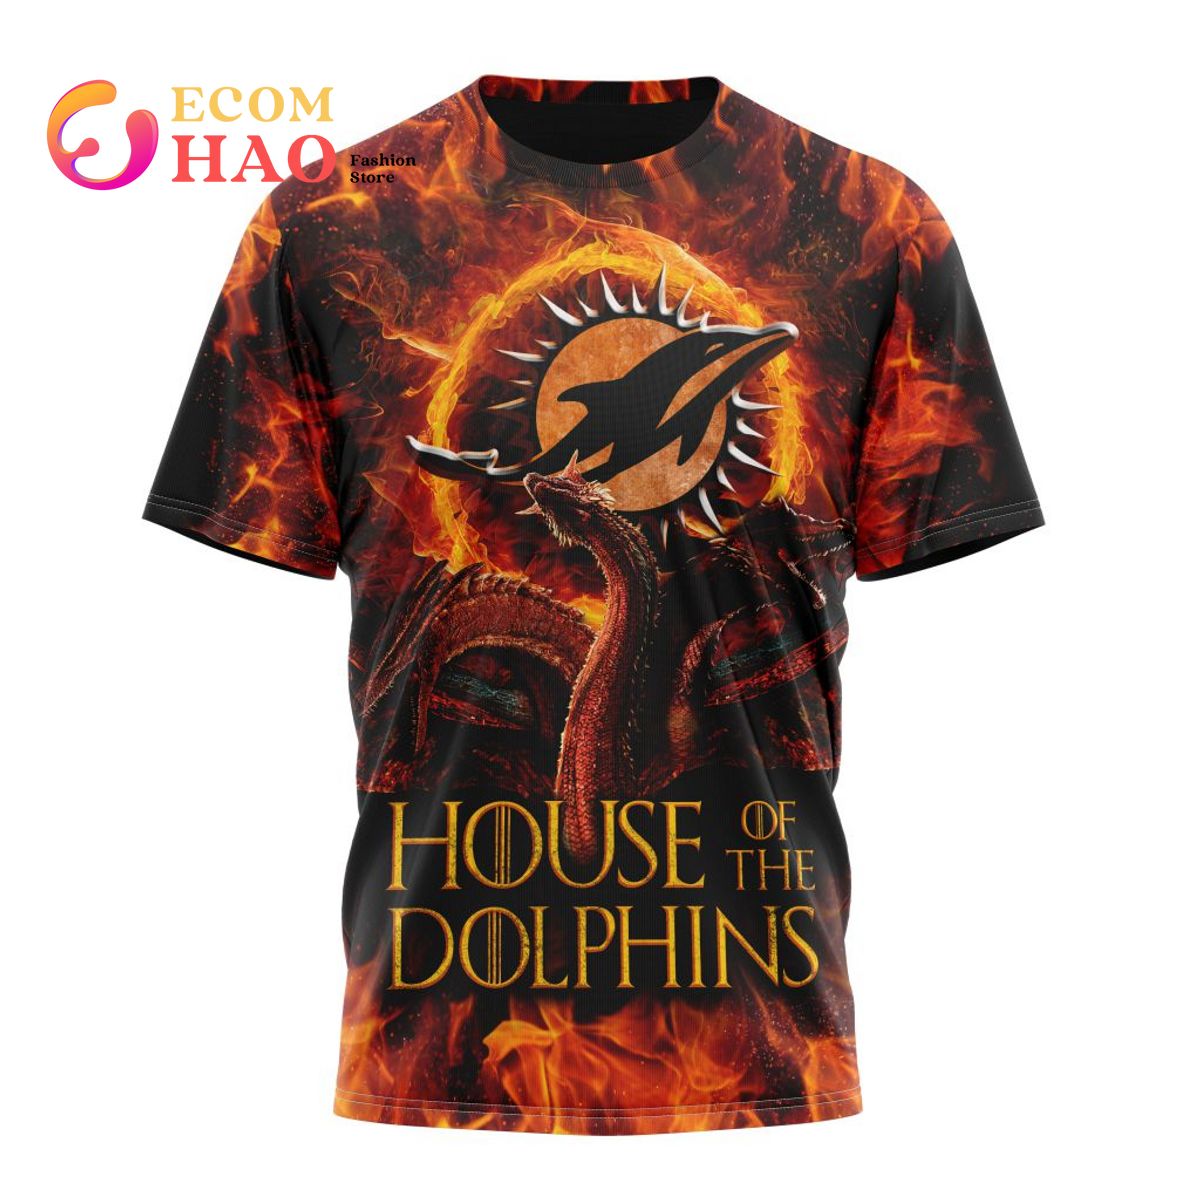 Miami Dolphins Shop - NFL Miami Dolphins GAME OF THRONES HOUSE OF THE DOLPHINS T SHIRT